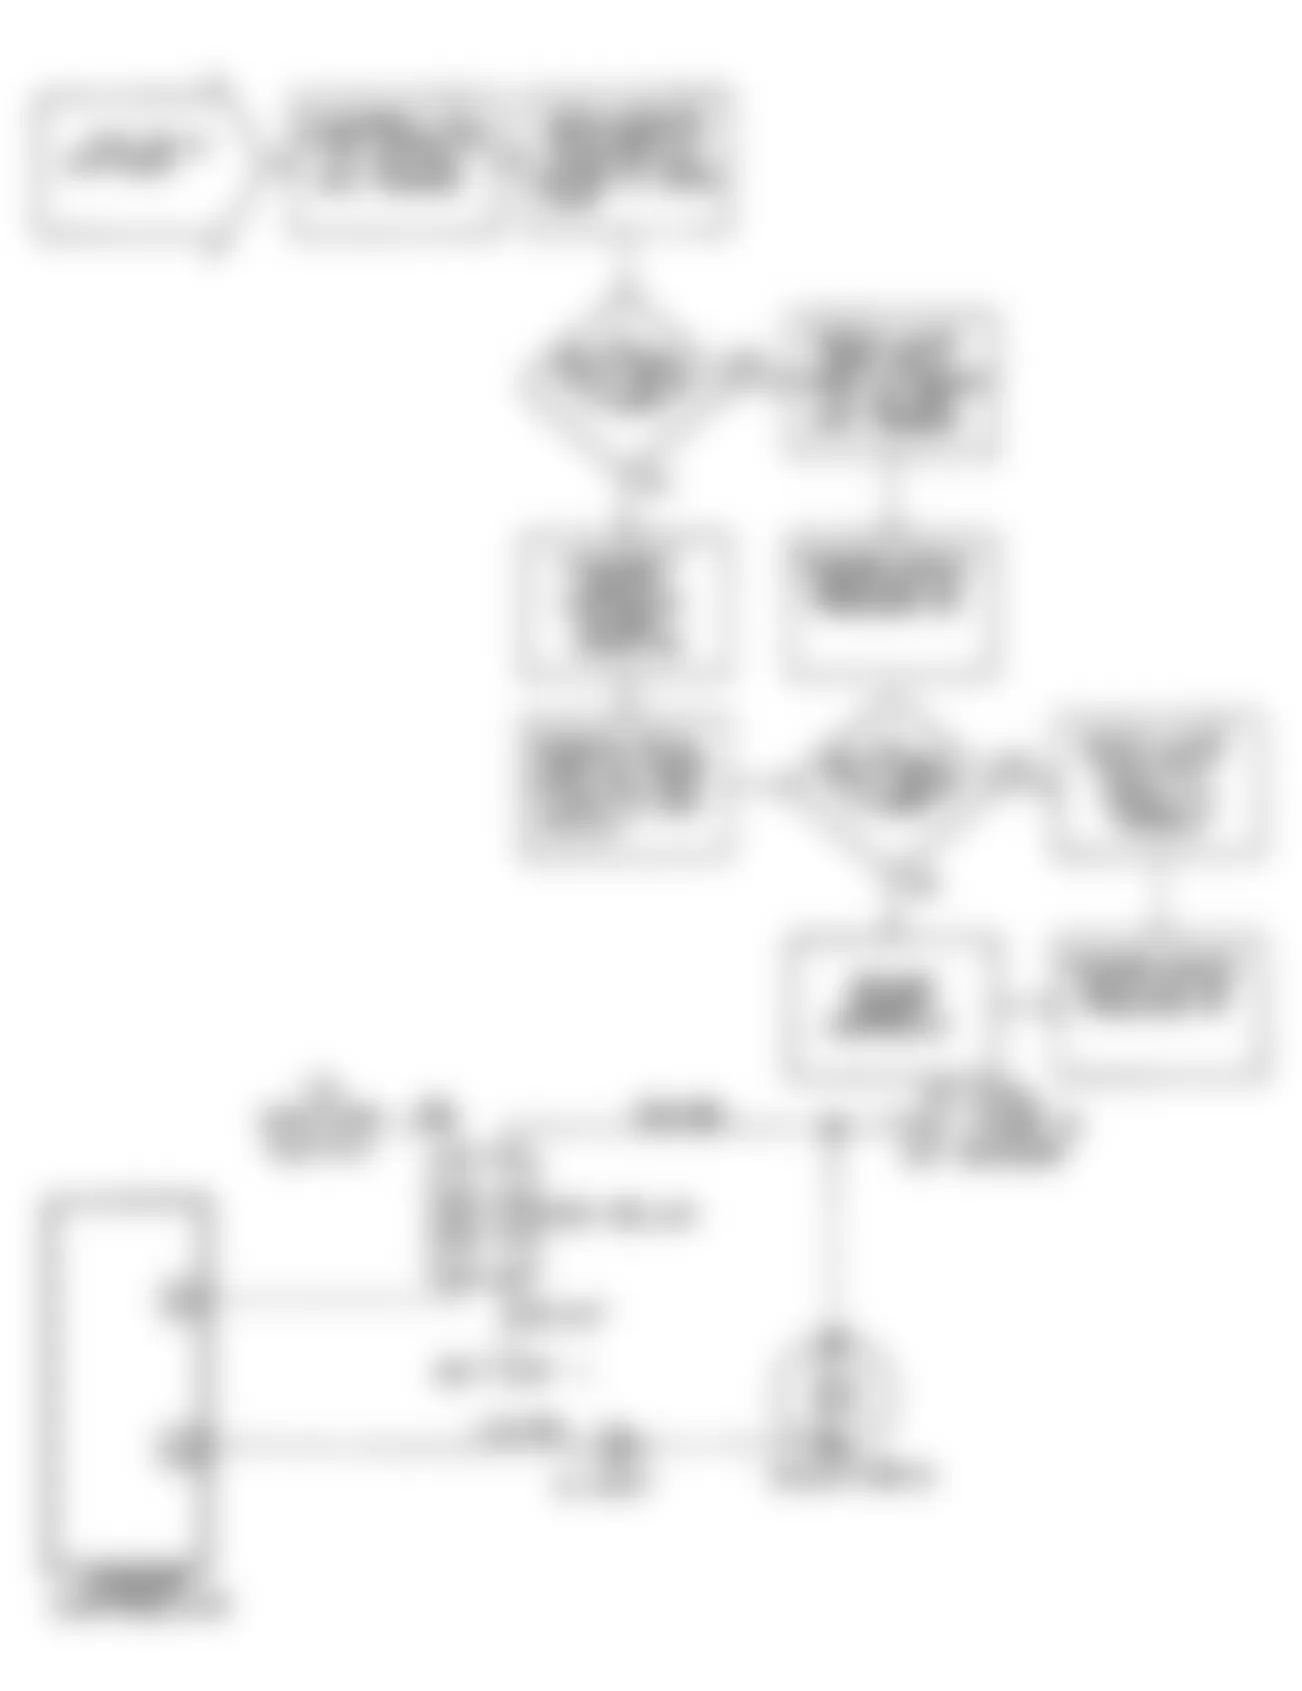 Chrysler LeBaron 1990 - Component Locations -  DR-19: Flow Chart (2 of 2)